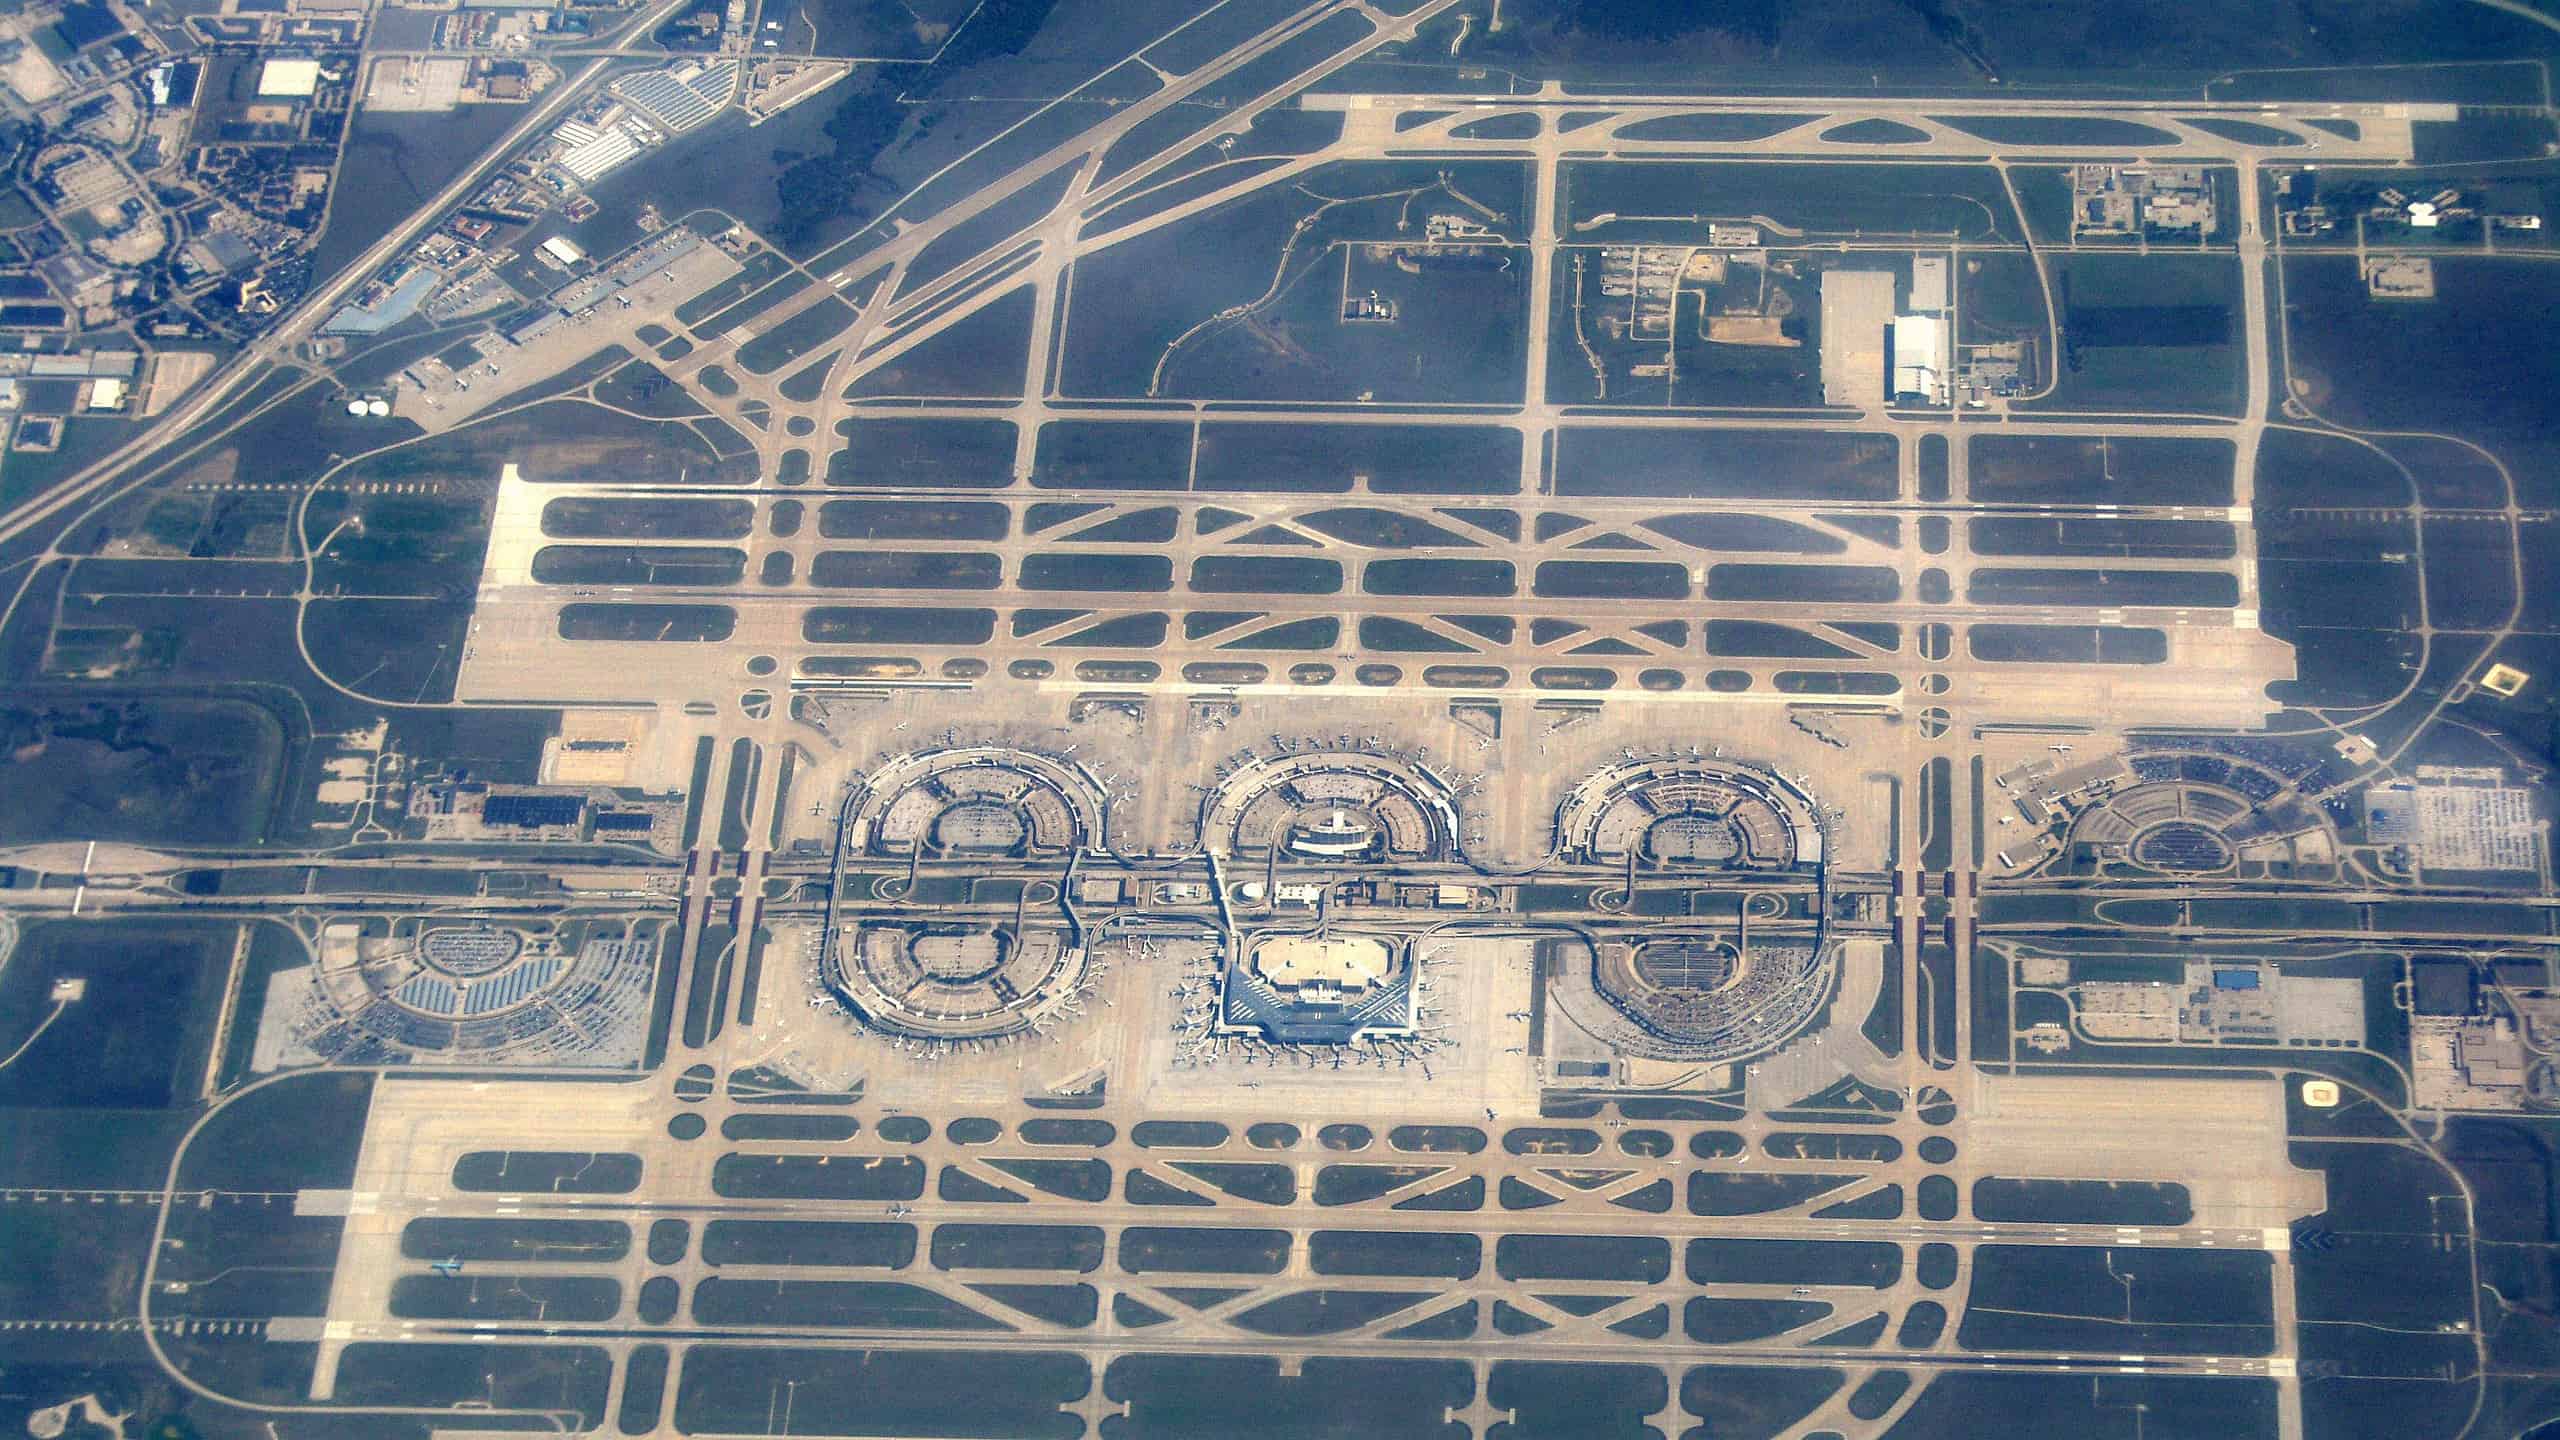 Dallas Forth Worth Airport Aerial View